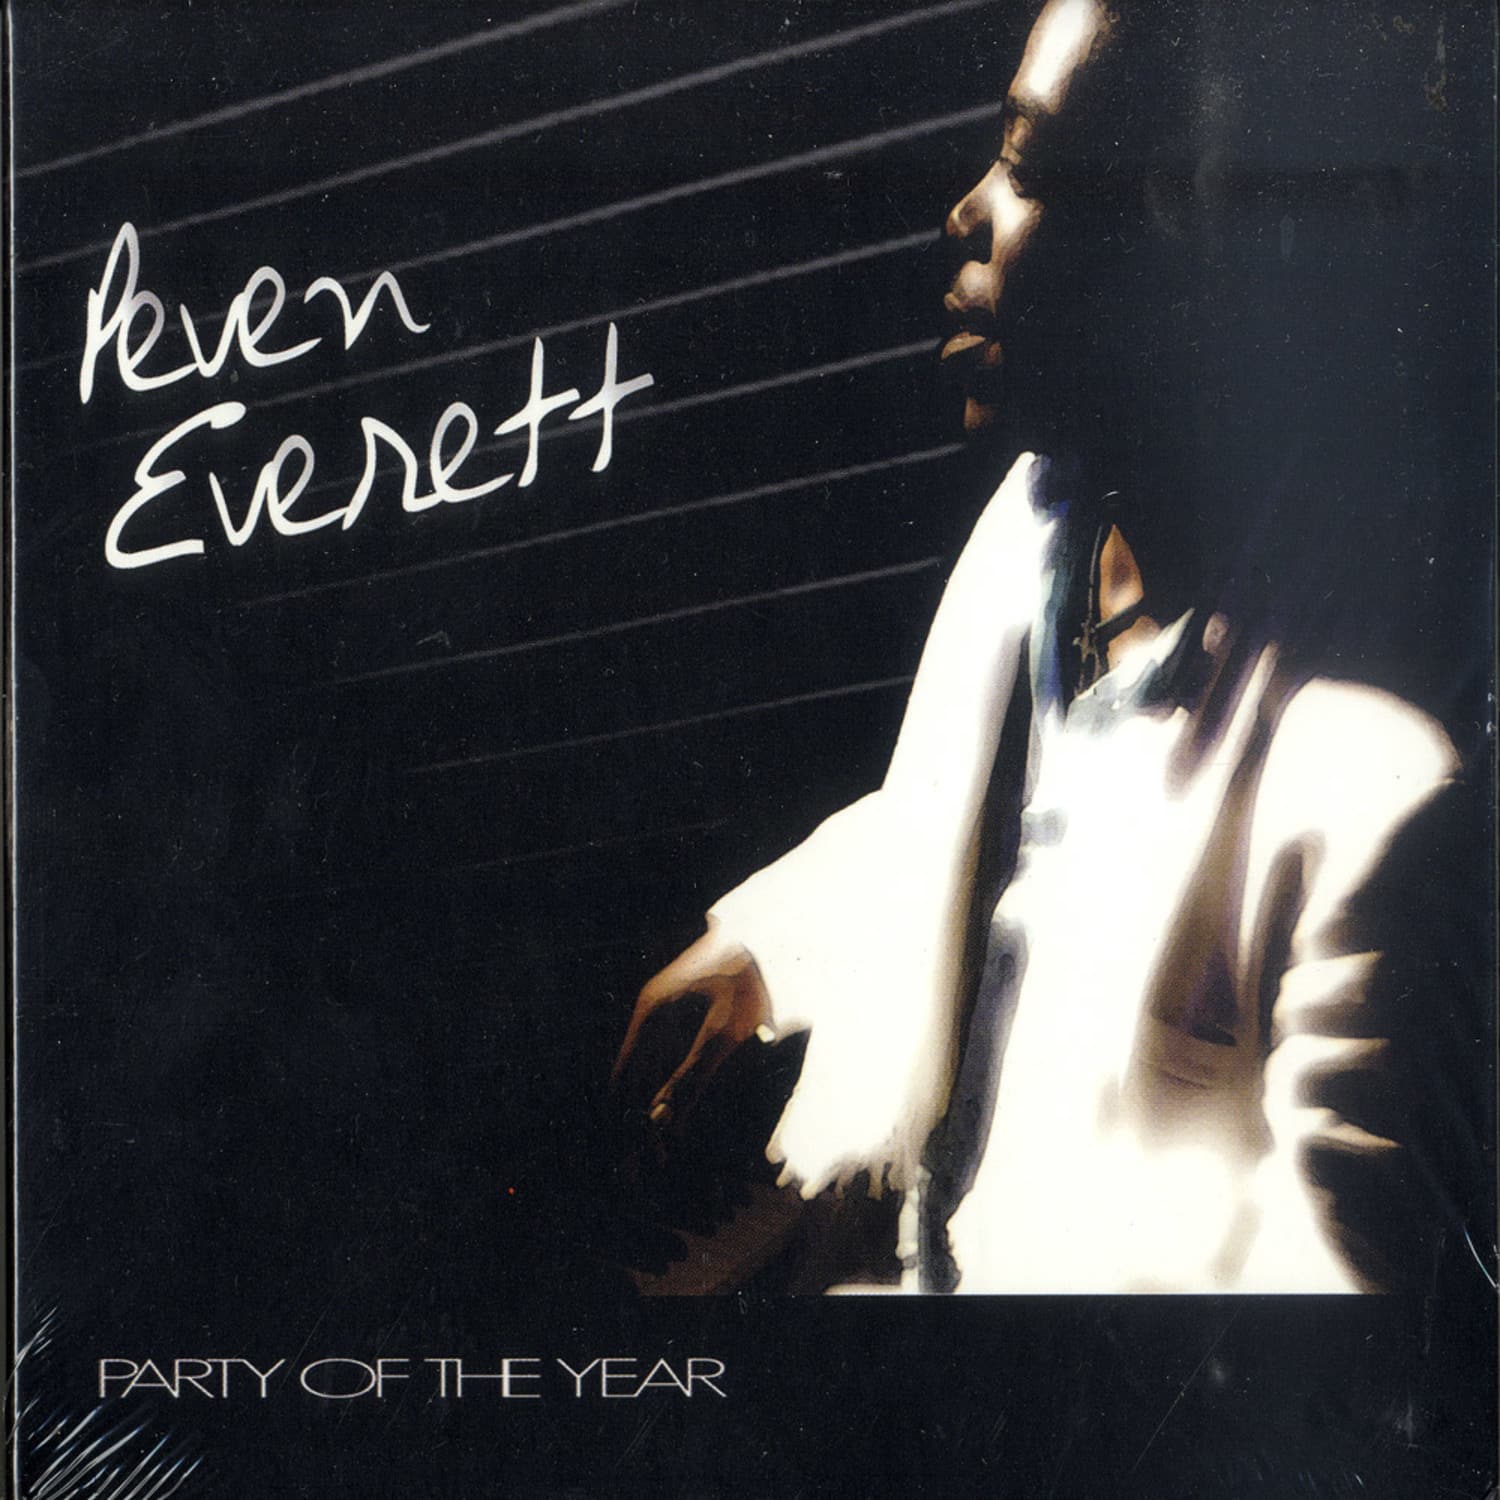 Peven Everett - PARTY OF THE YEAR 